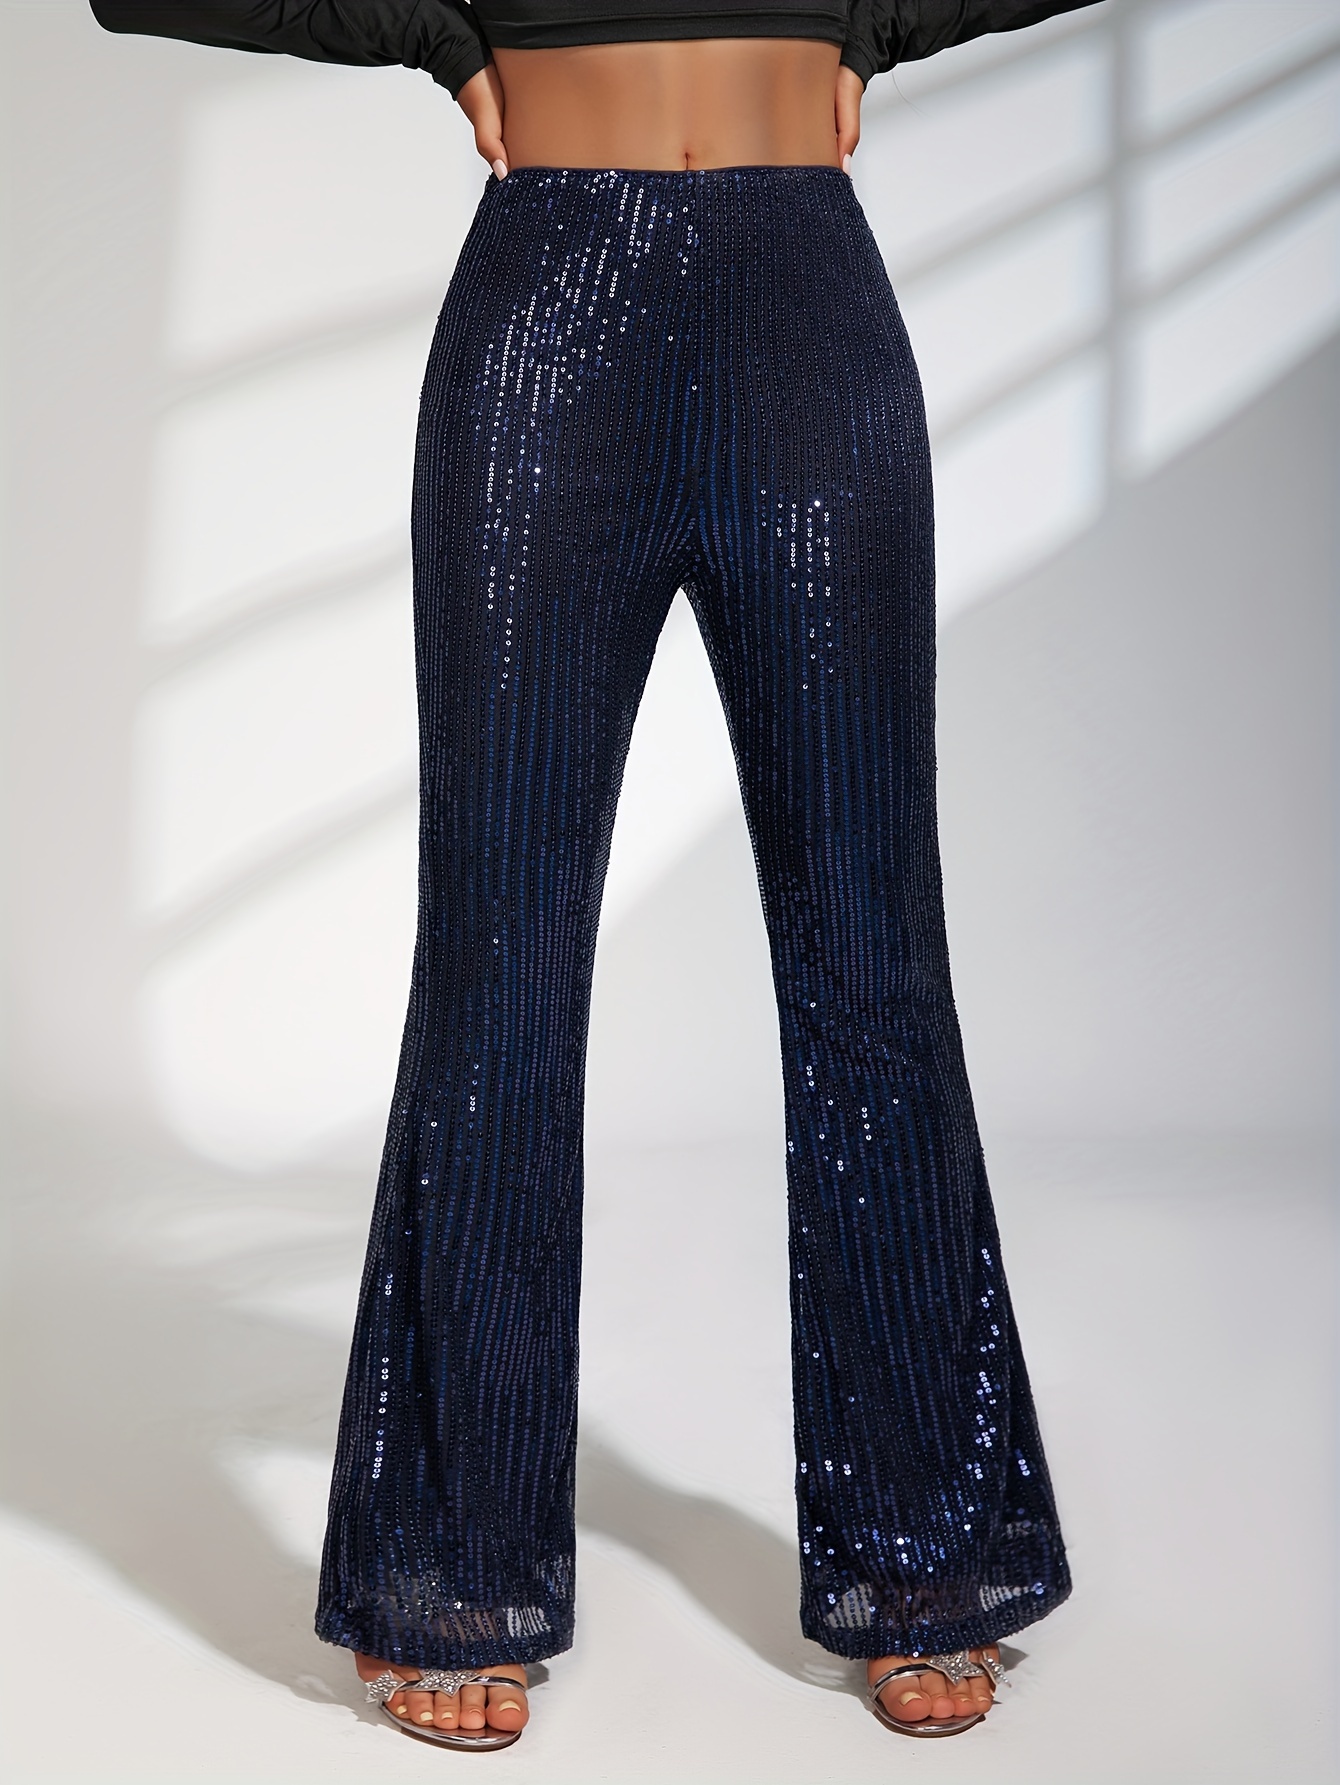 sequined high waist pants elegant flare leg pants for party club womens clothing